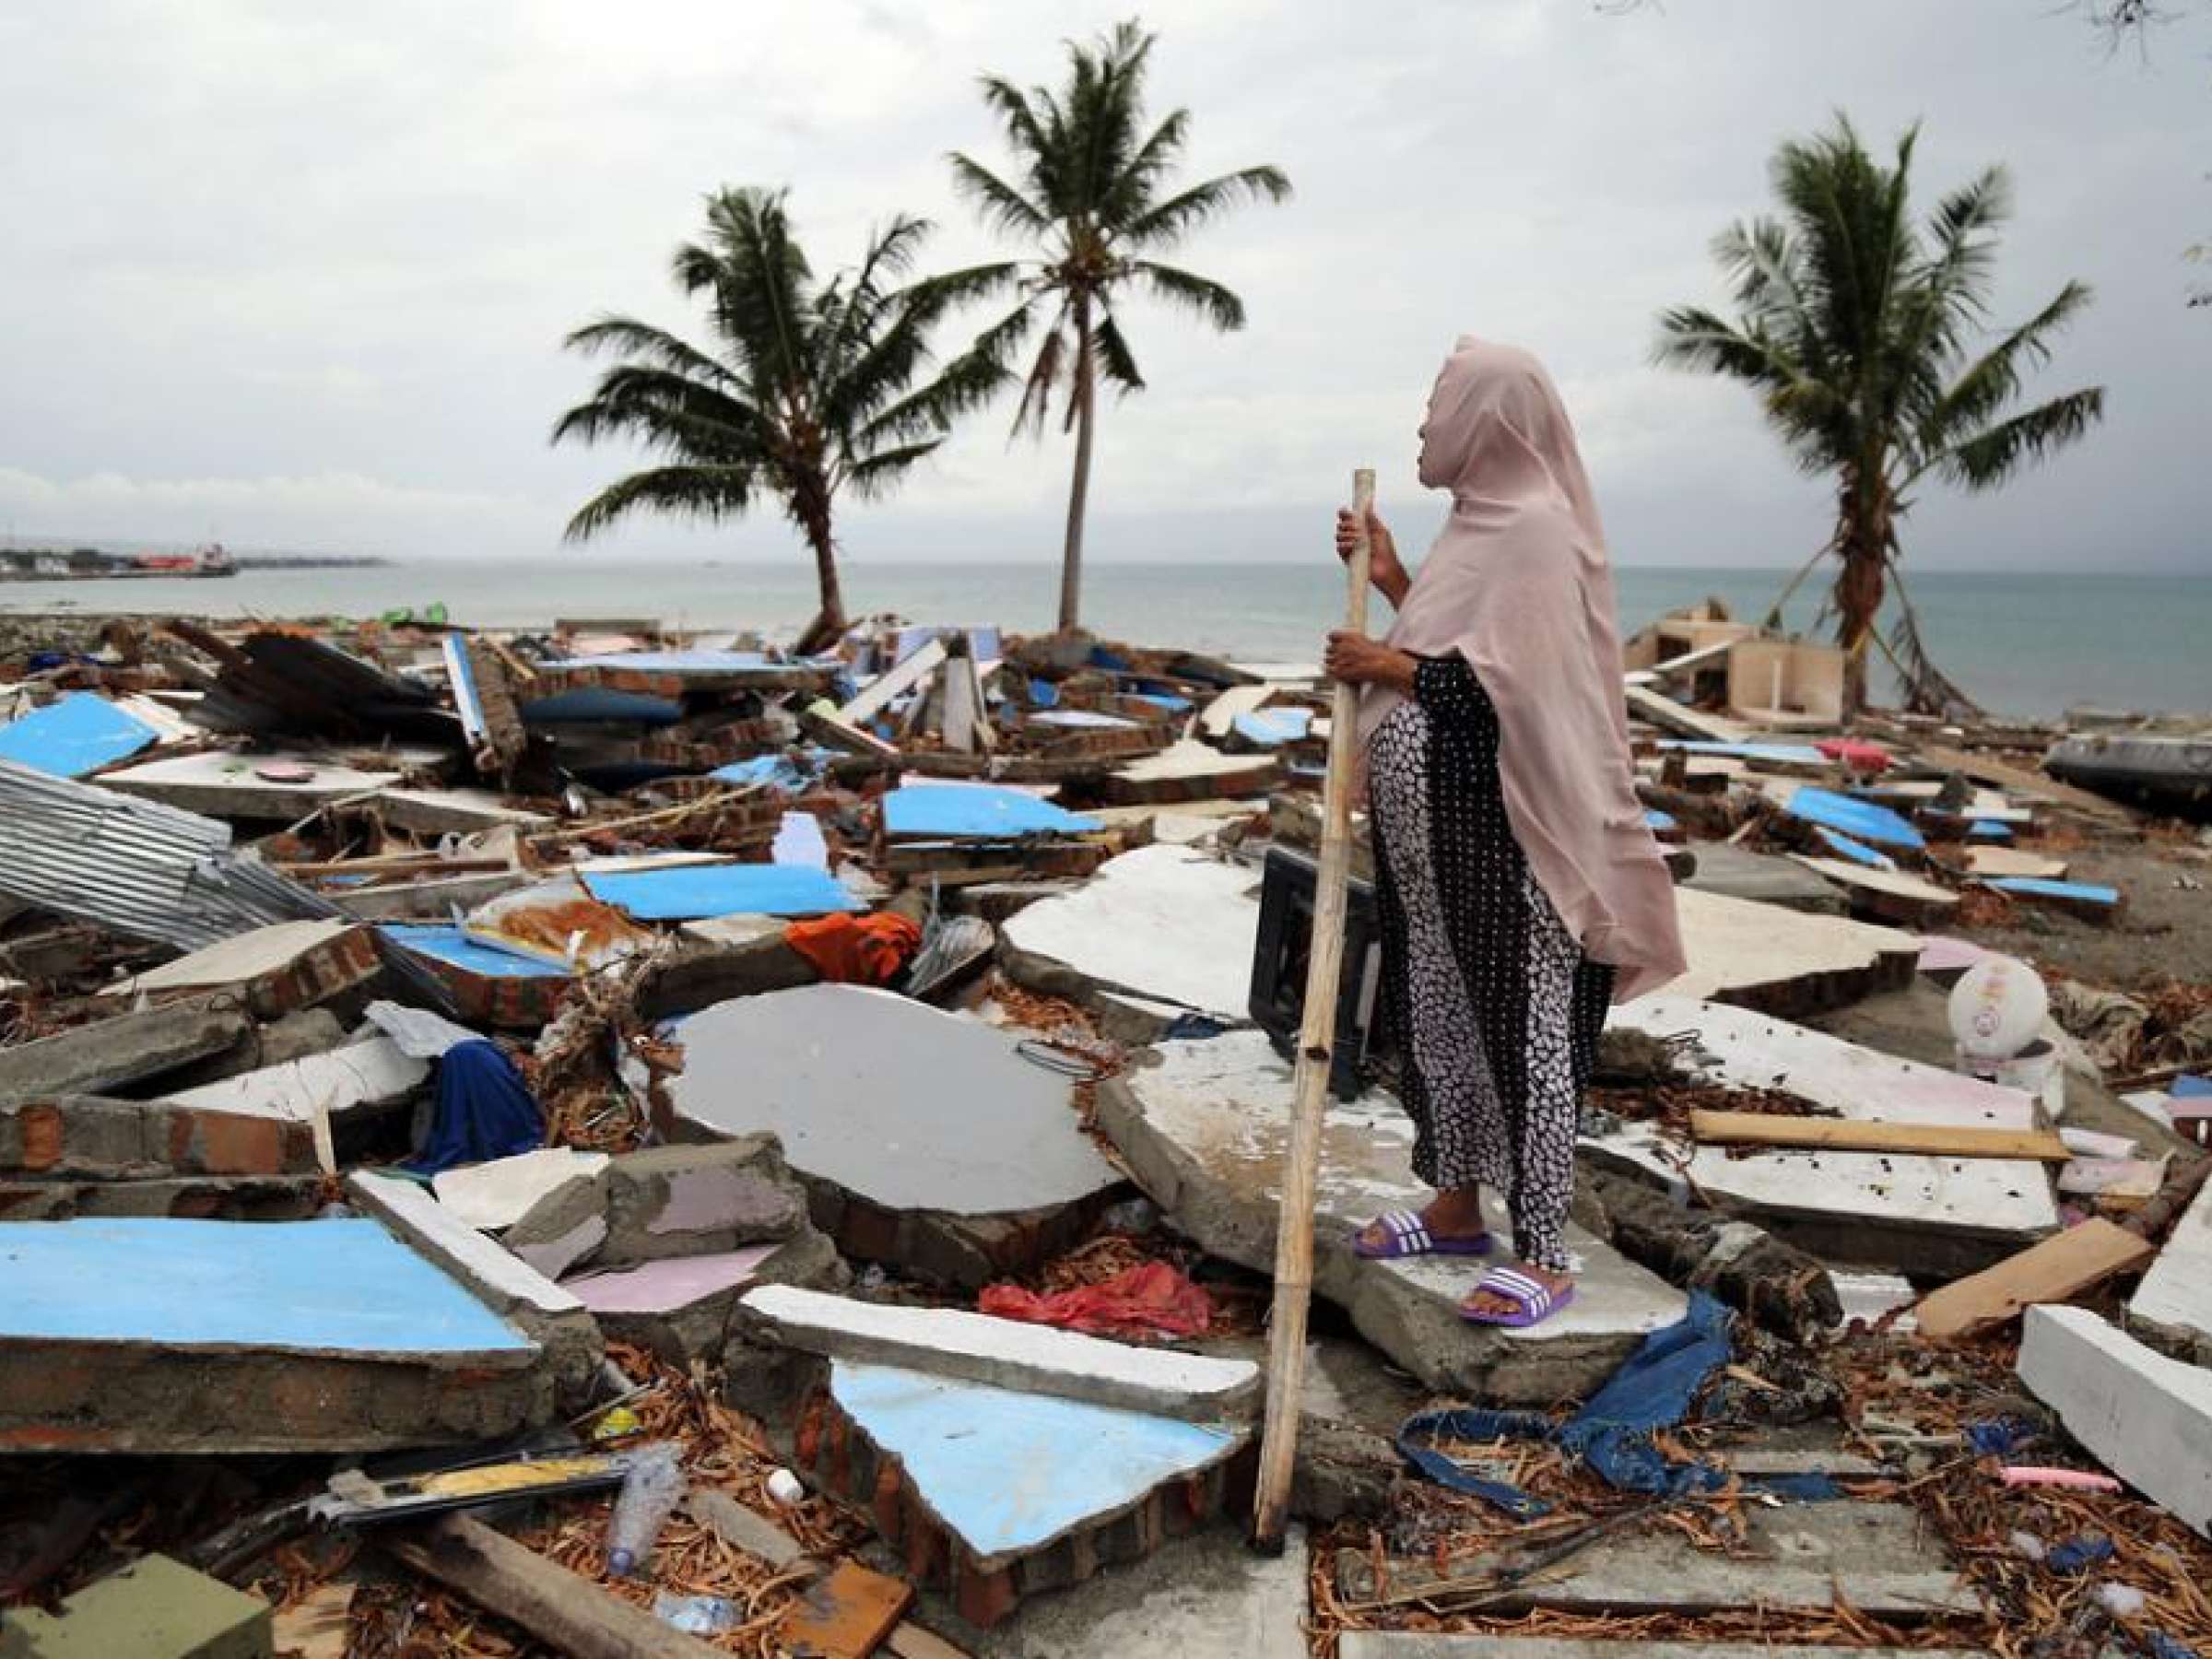 Mamboro fishing village in Indonesia after the 2018 Sulawesi earthquake and tsunami.